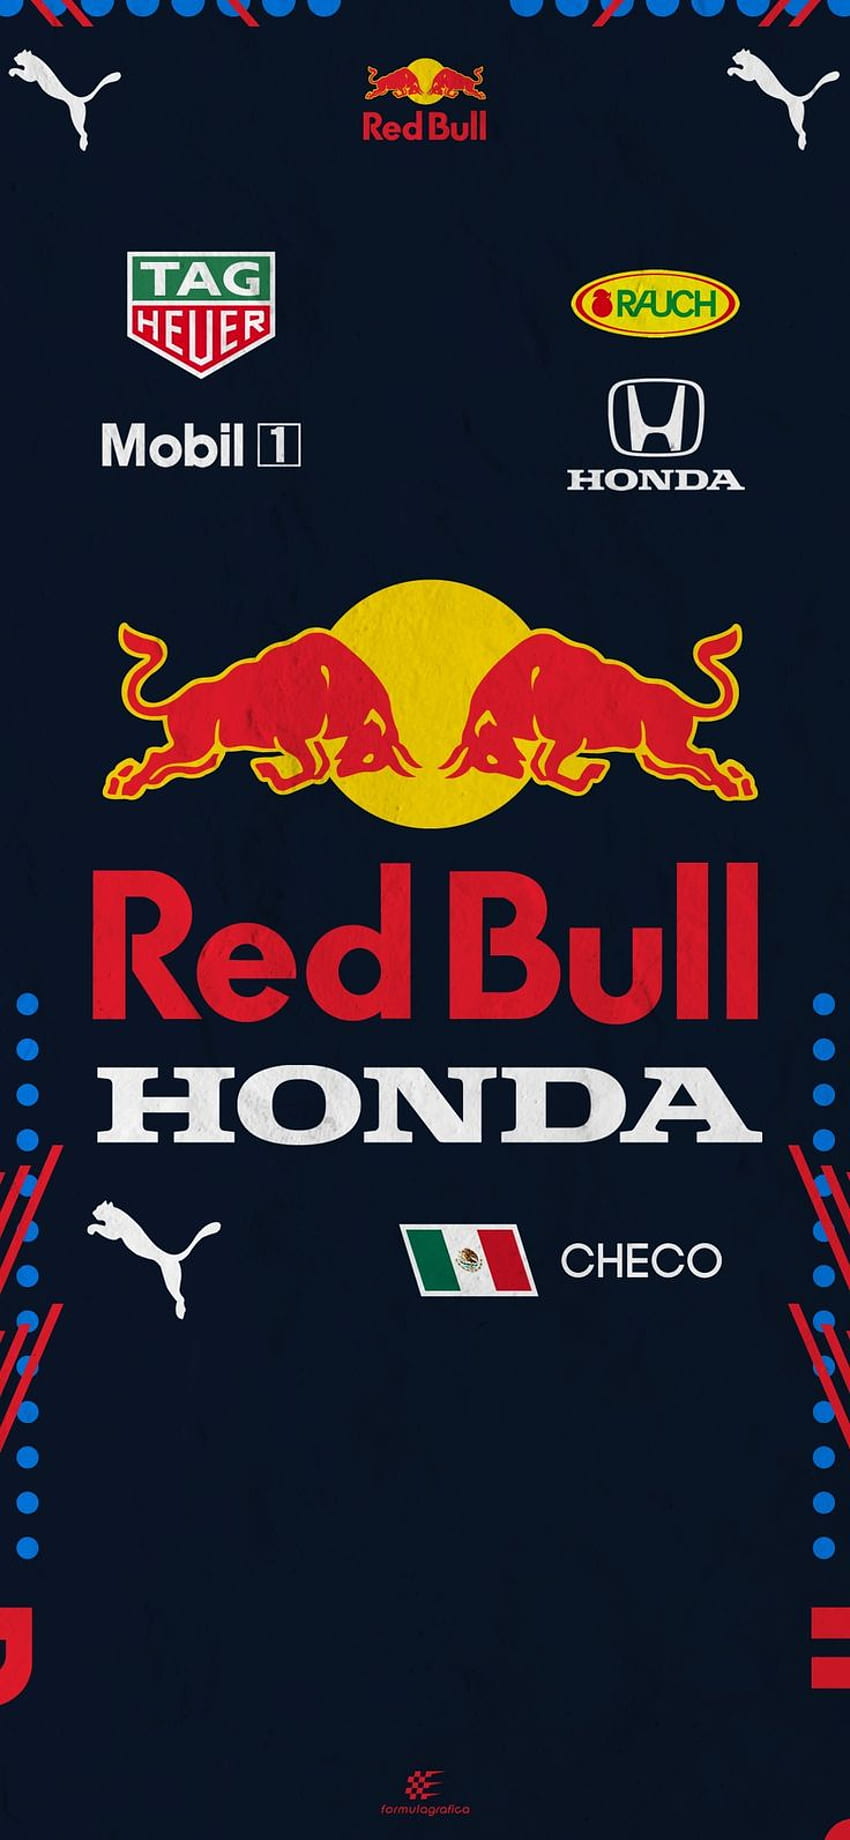 Sergio Perez racing suit If you like these , don't forget it share it with your friends and your favor in 2021. Red Bull f1, Sergio perez, Red Bull racing, Checo 見てみる HD電話の壁紙